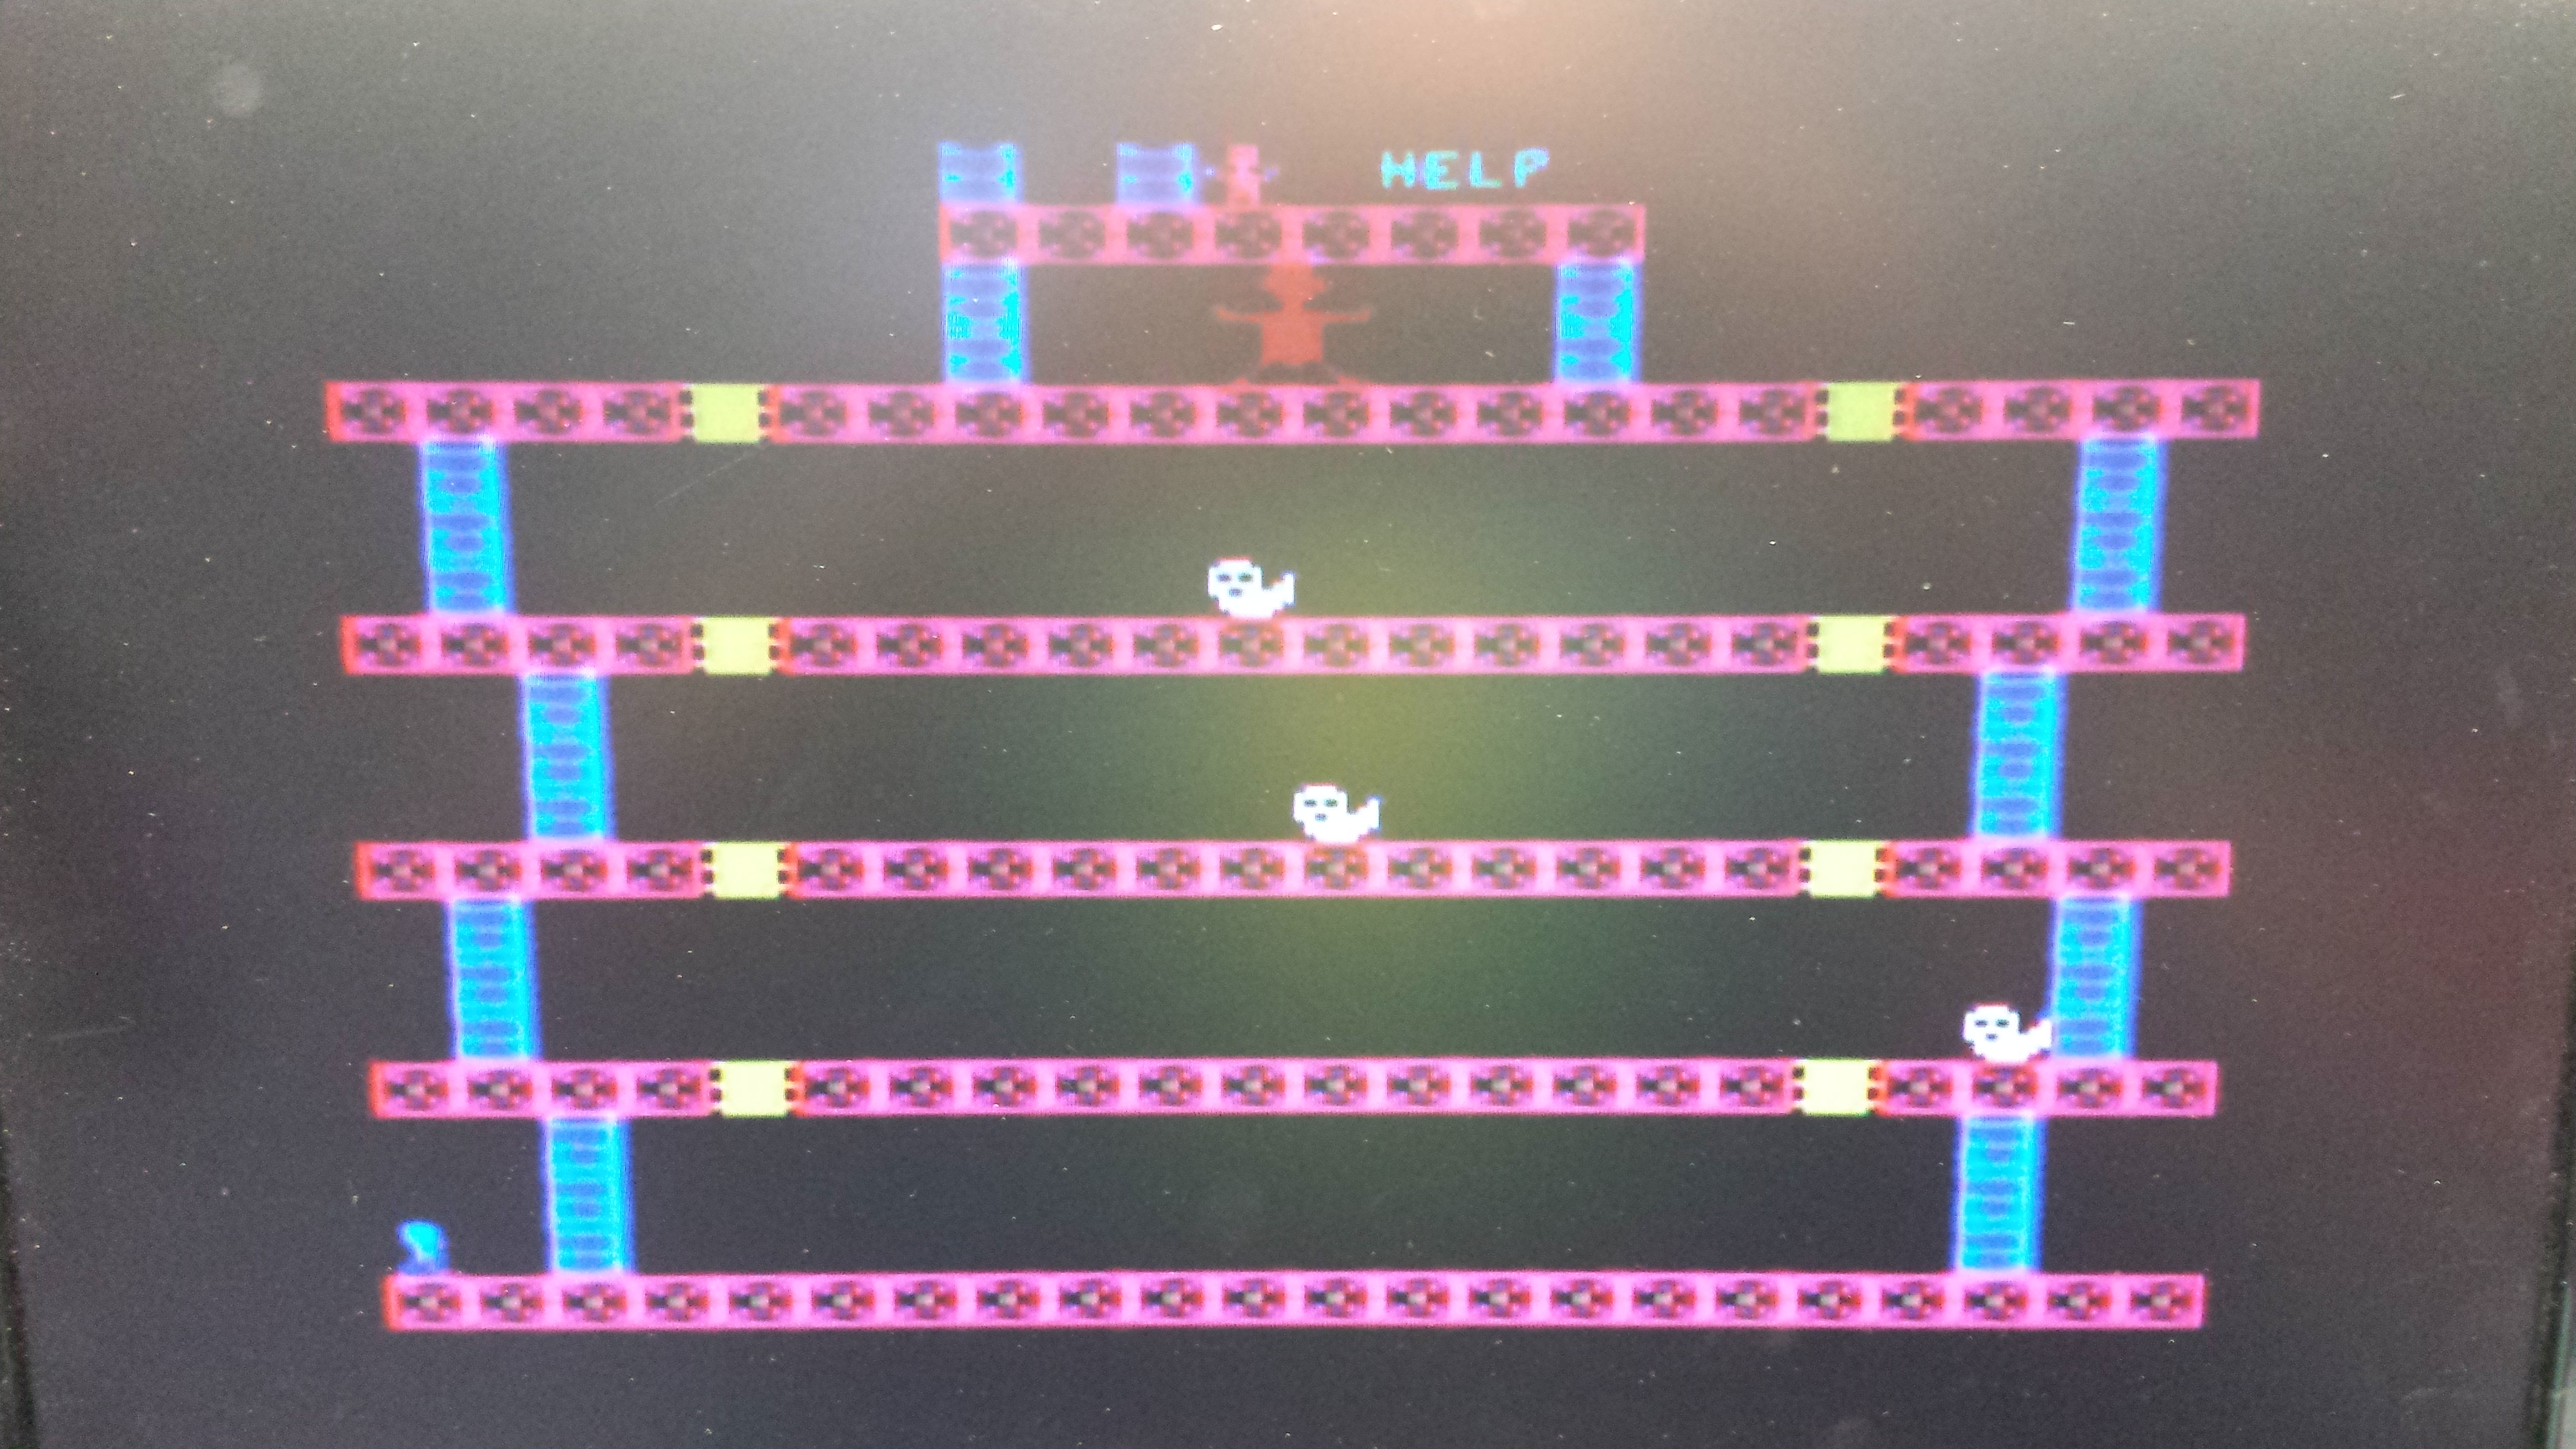 Homebrew Donkey Kong game for the VIC-20